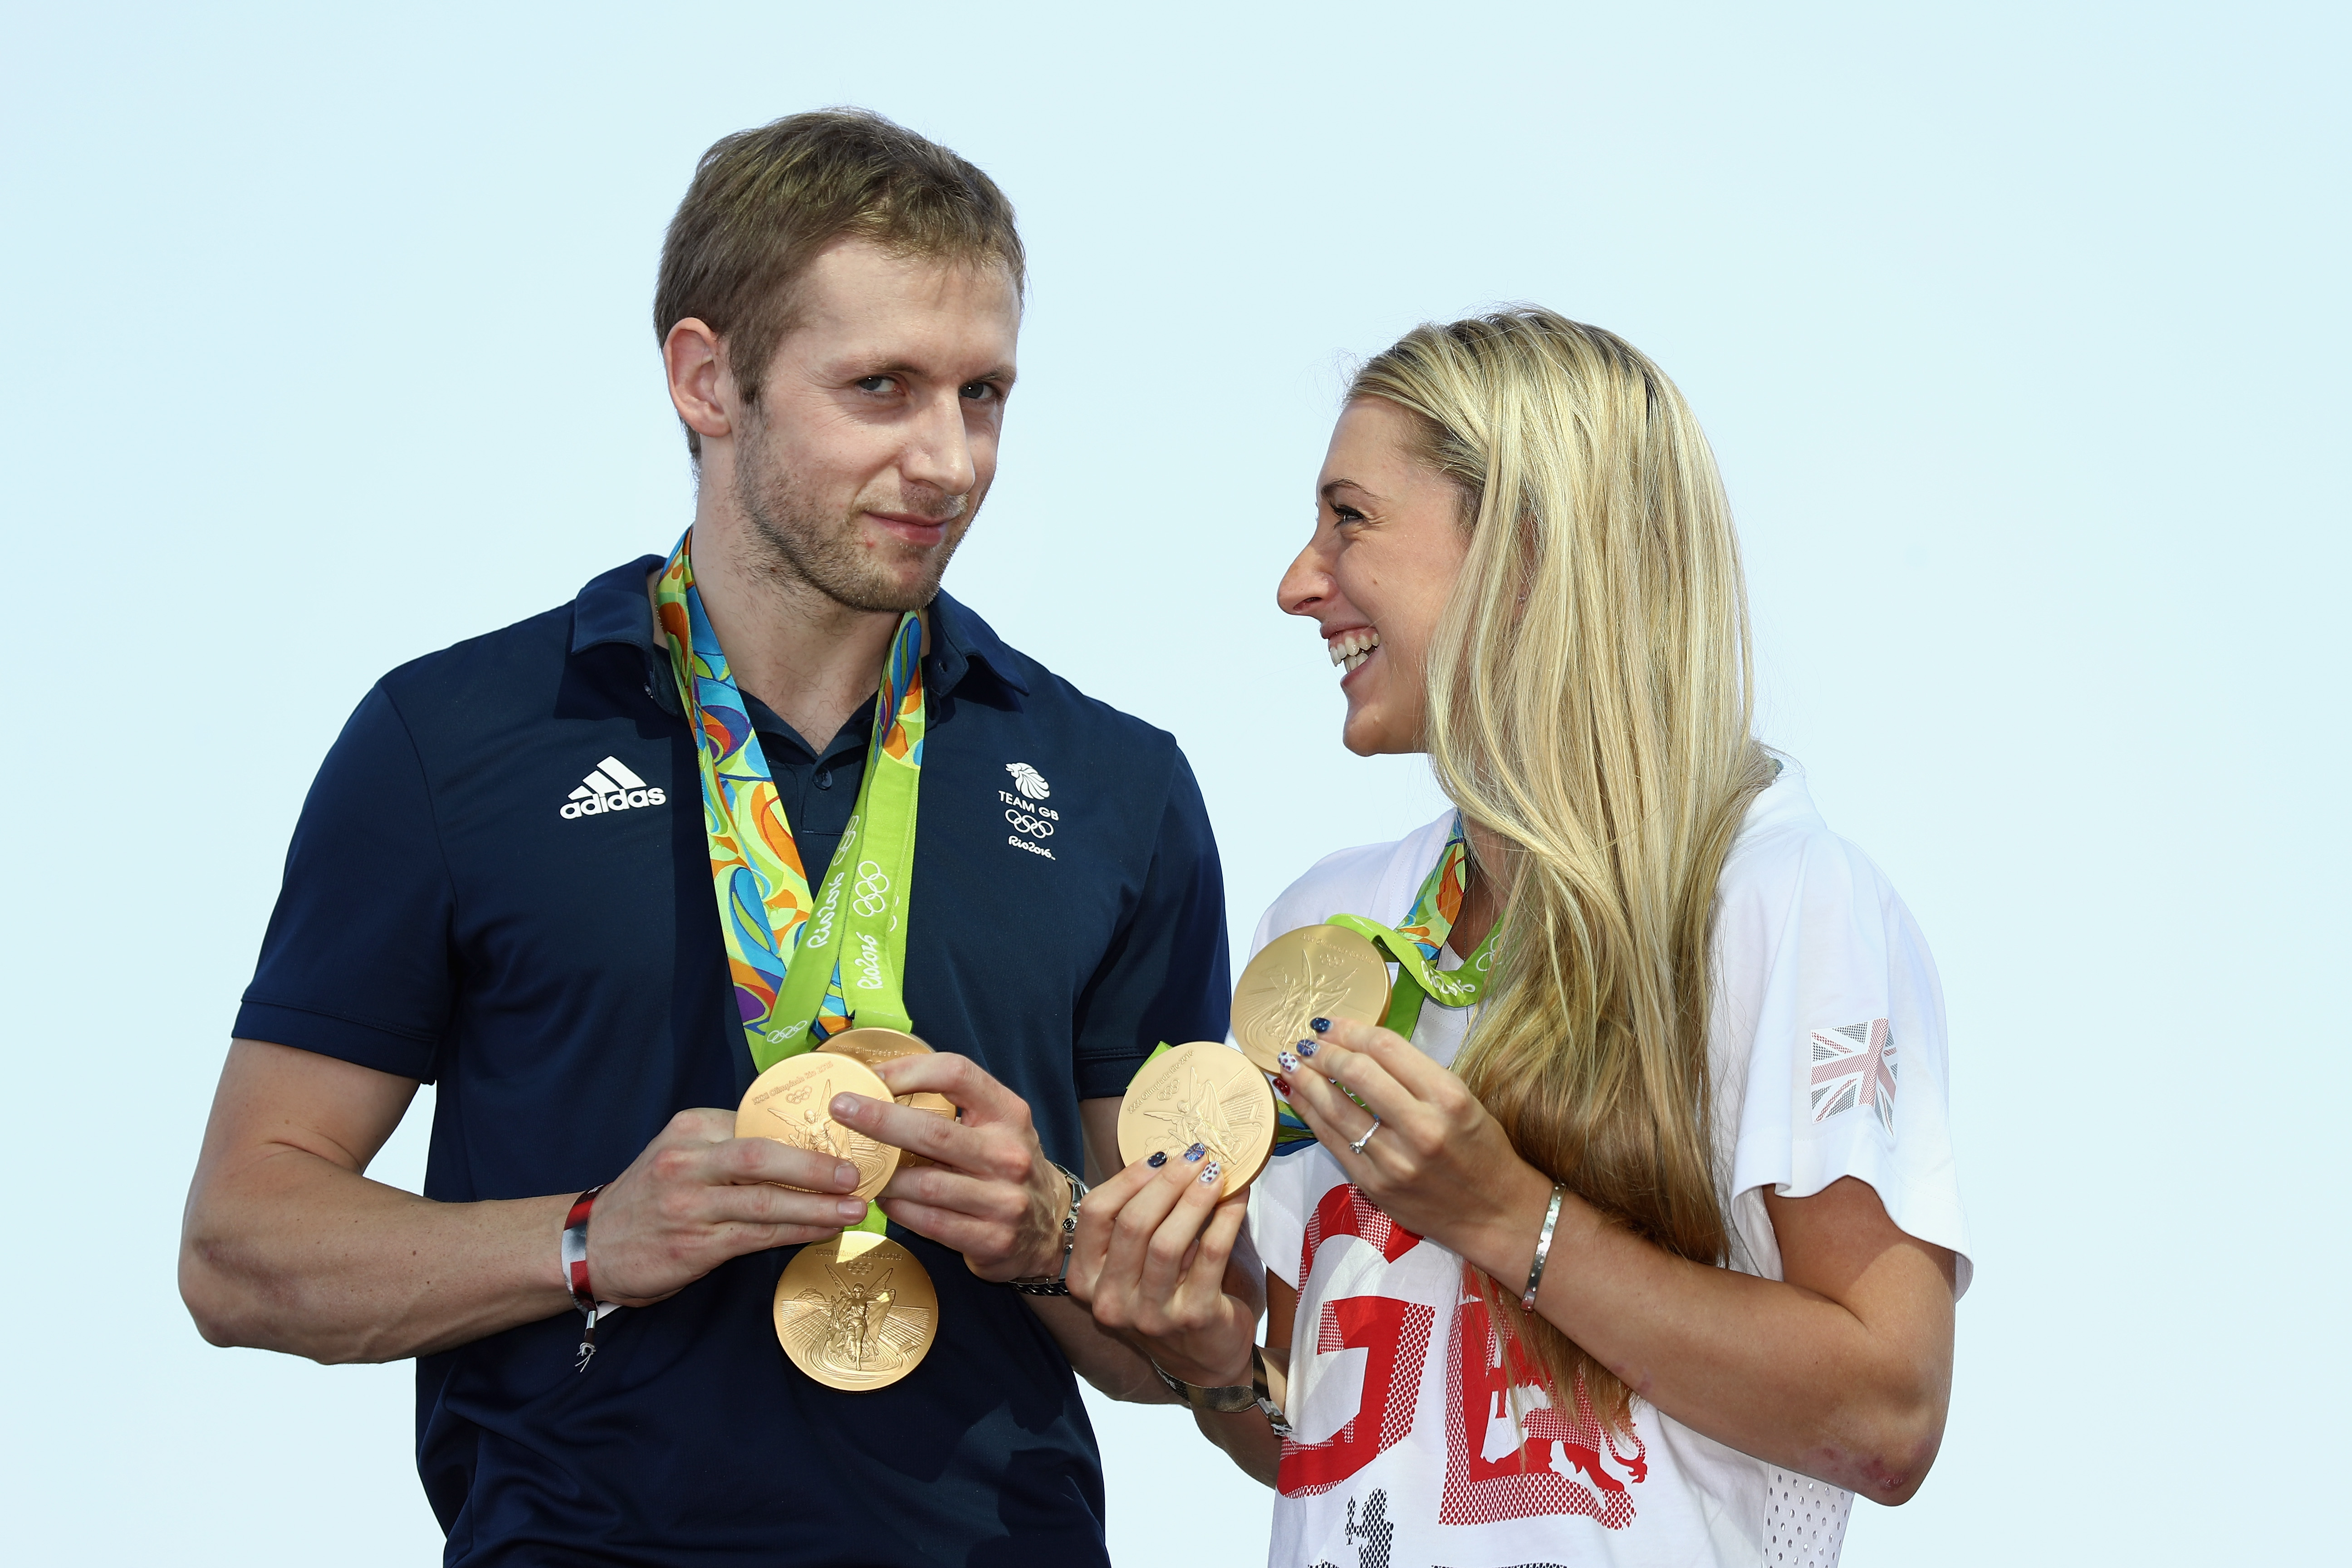 RIO DE JANEIRO, BRAZIL - AUGUST 17: Team GB cyclists Laura Trott and Jason Kenny pose with their gold medals at Adidas House on August 17, 2016 in Rio de Janeiro, Brazil. (Photo by Bryn Lennon/Getty Images)